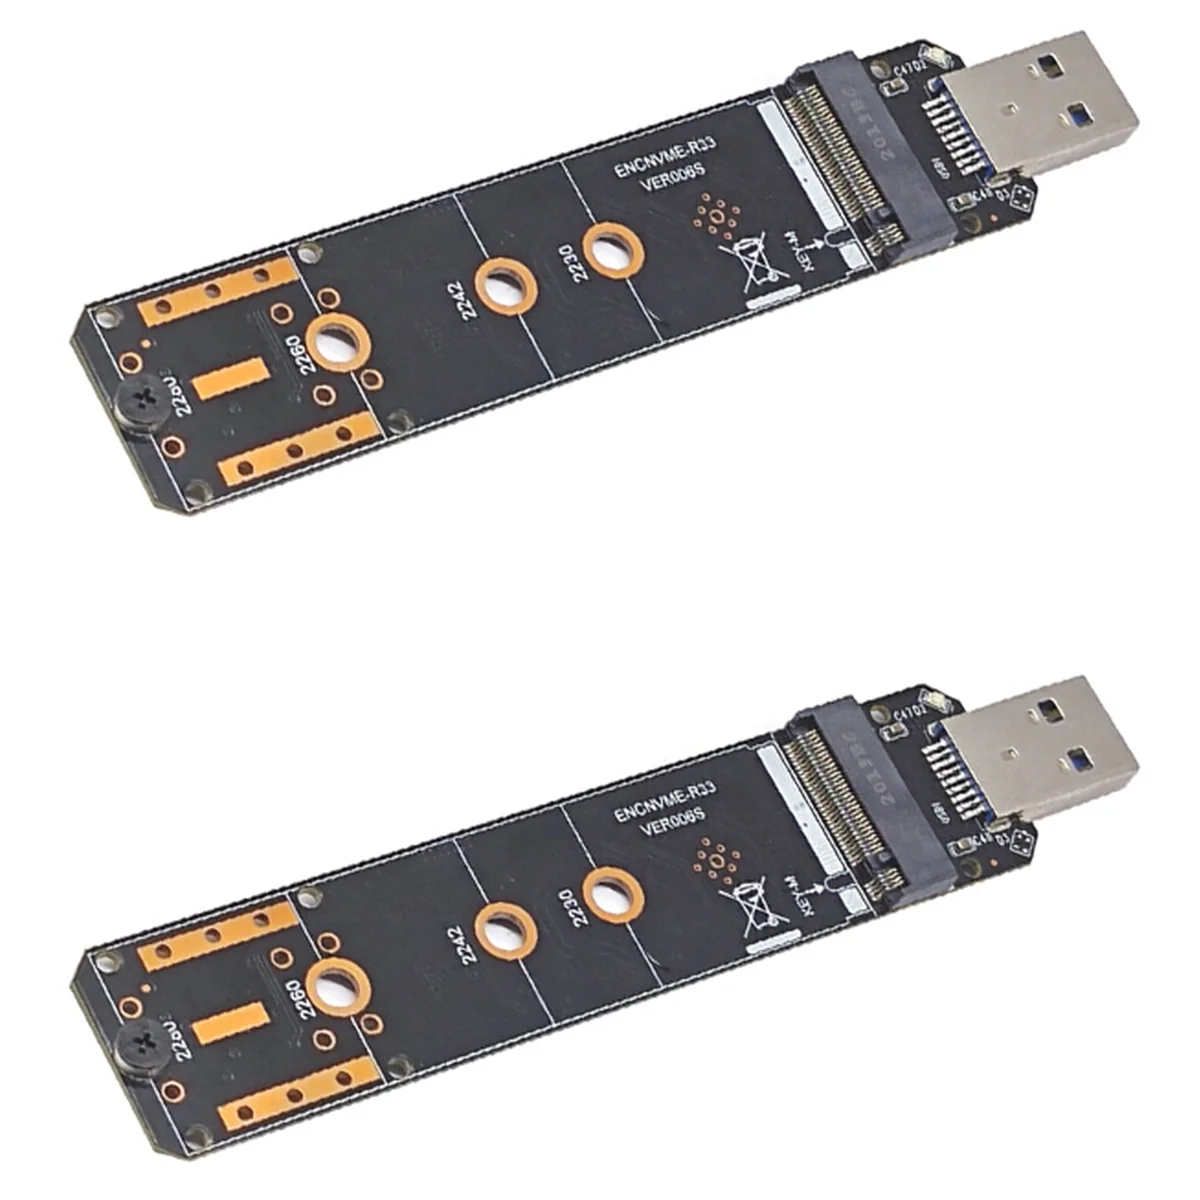 

2X M.2 NVME SSD To USB3.2 GEN2 10Gbps Adapter M.2 NVME SSD Adapter for 2230 2242 2260 2280 NVME M.2 SSD RTL9210B